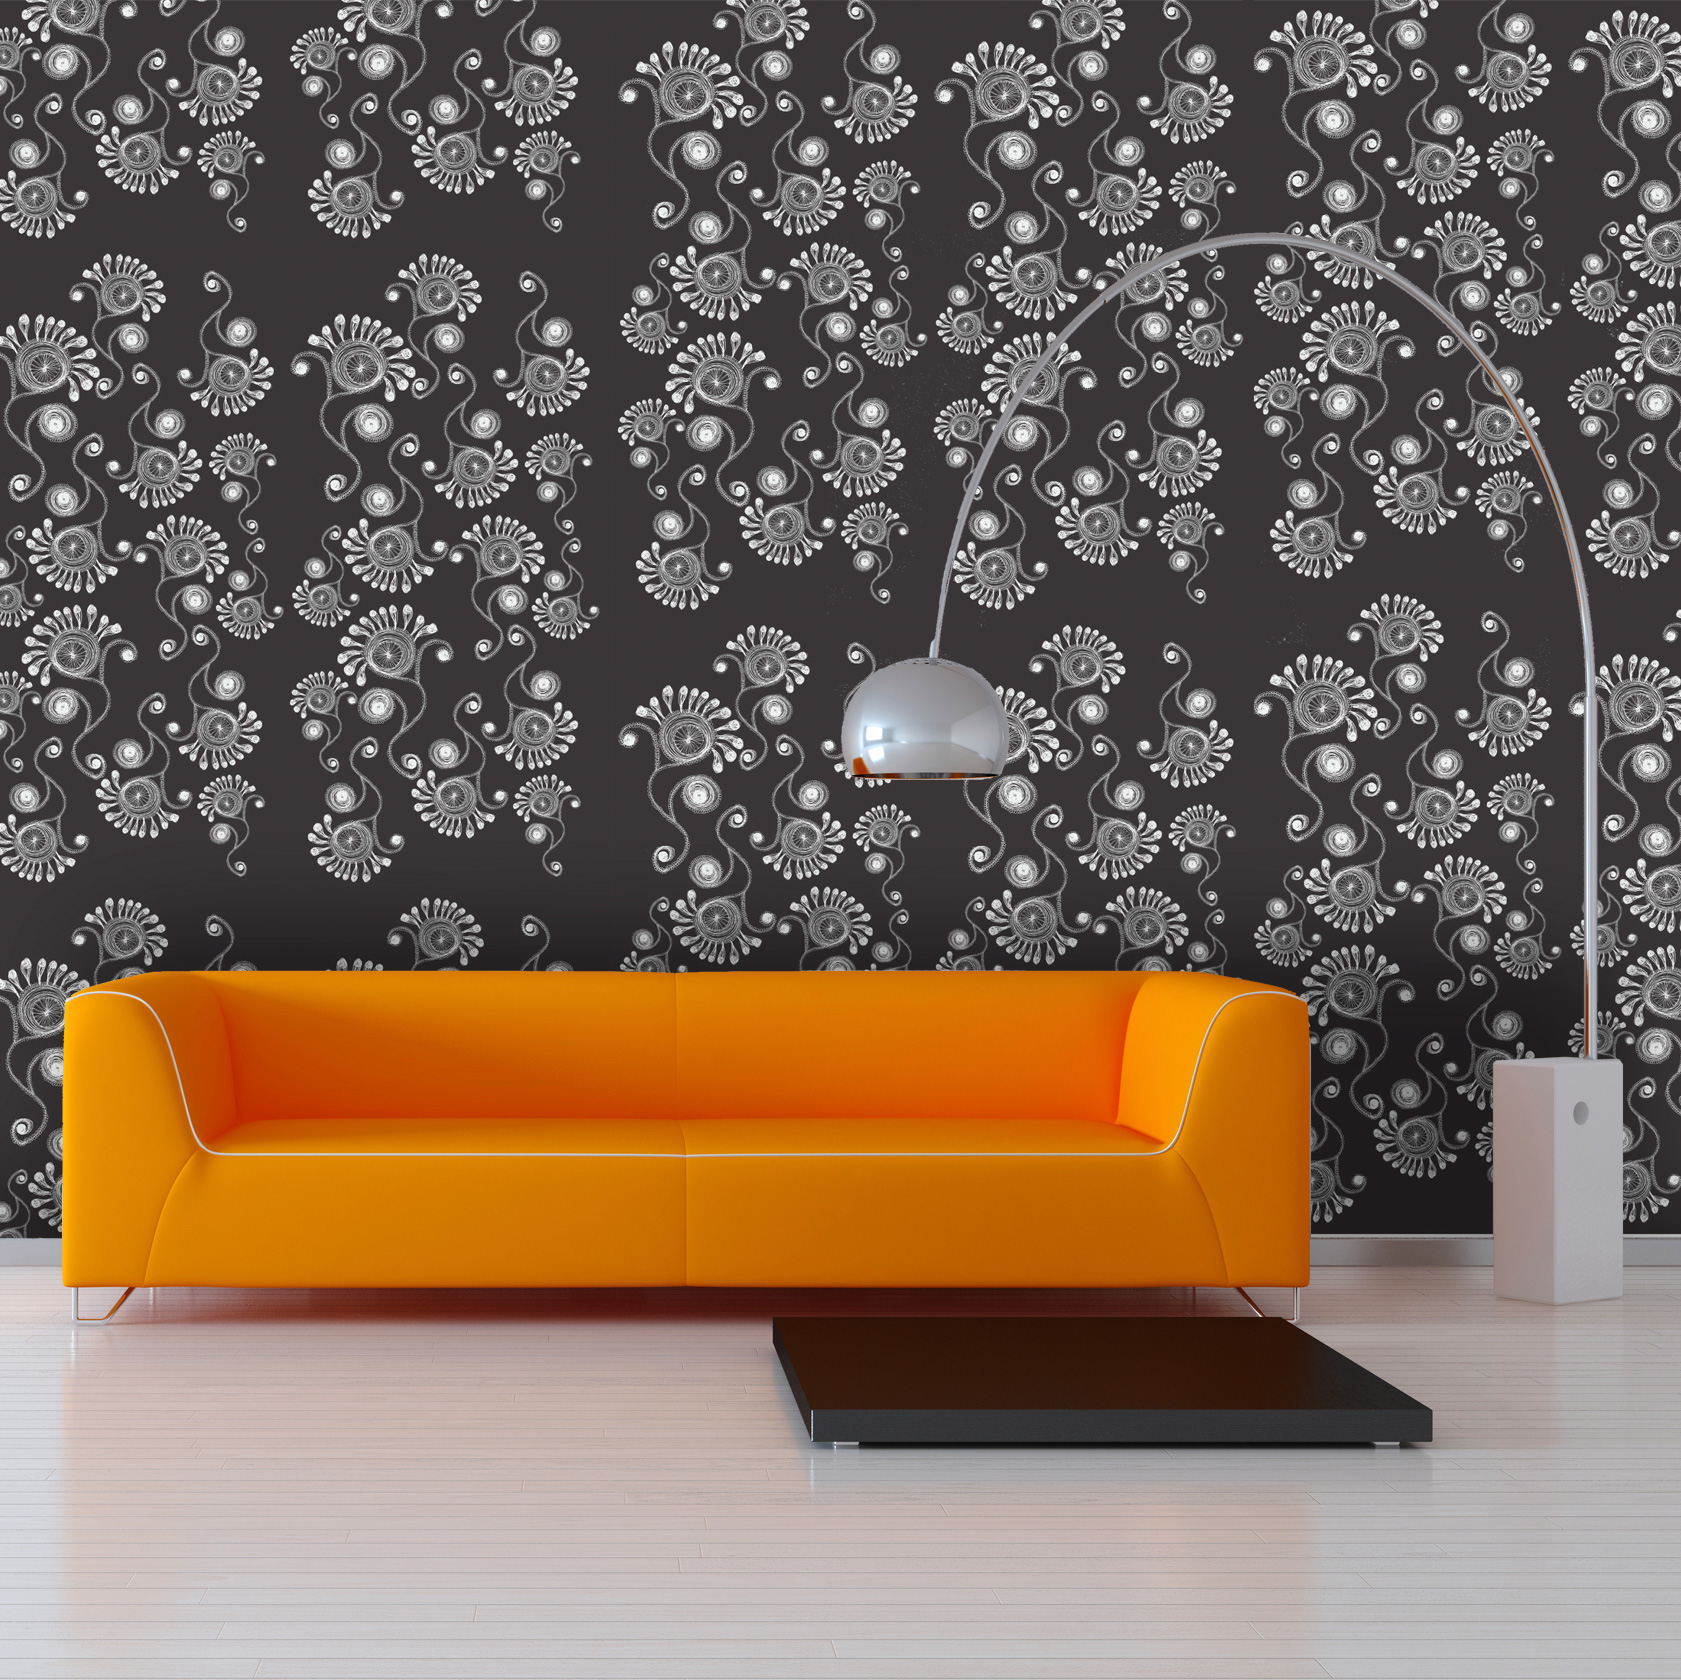 Orange-Couch-&-Arco-Lamp-SQUARE-MADDY-charcoal.jpg